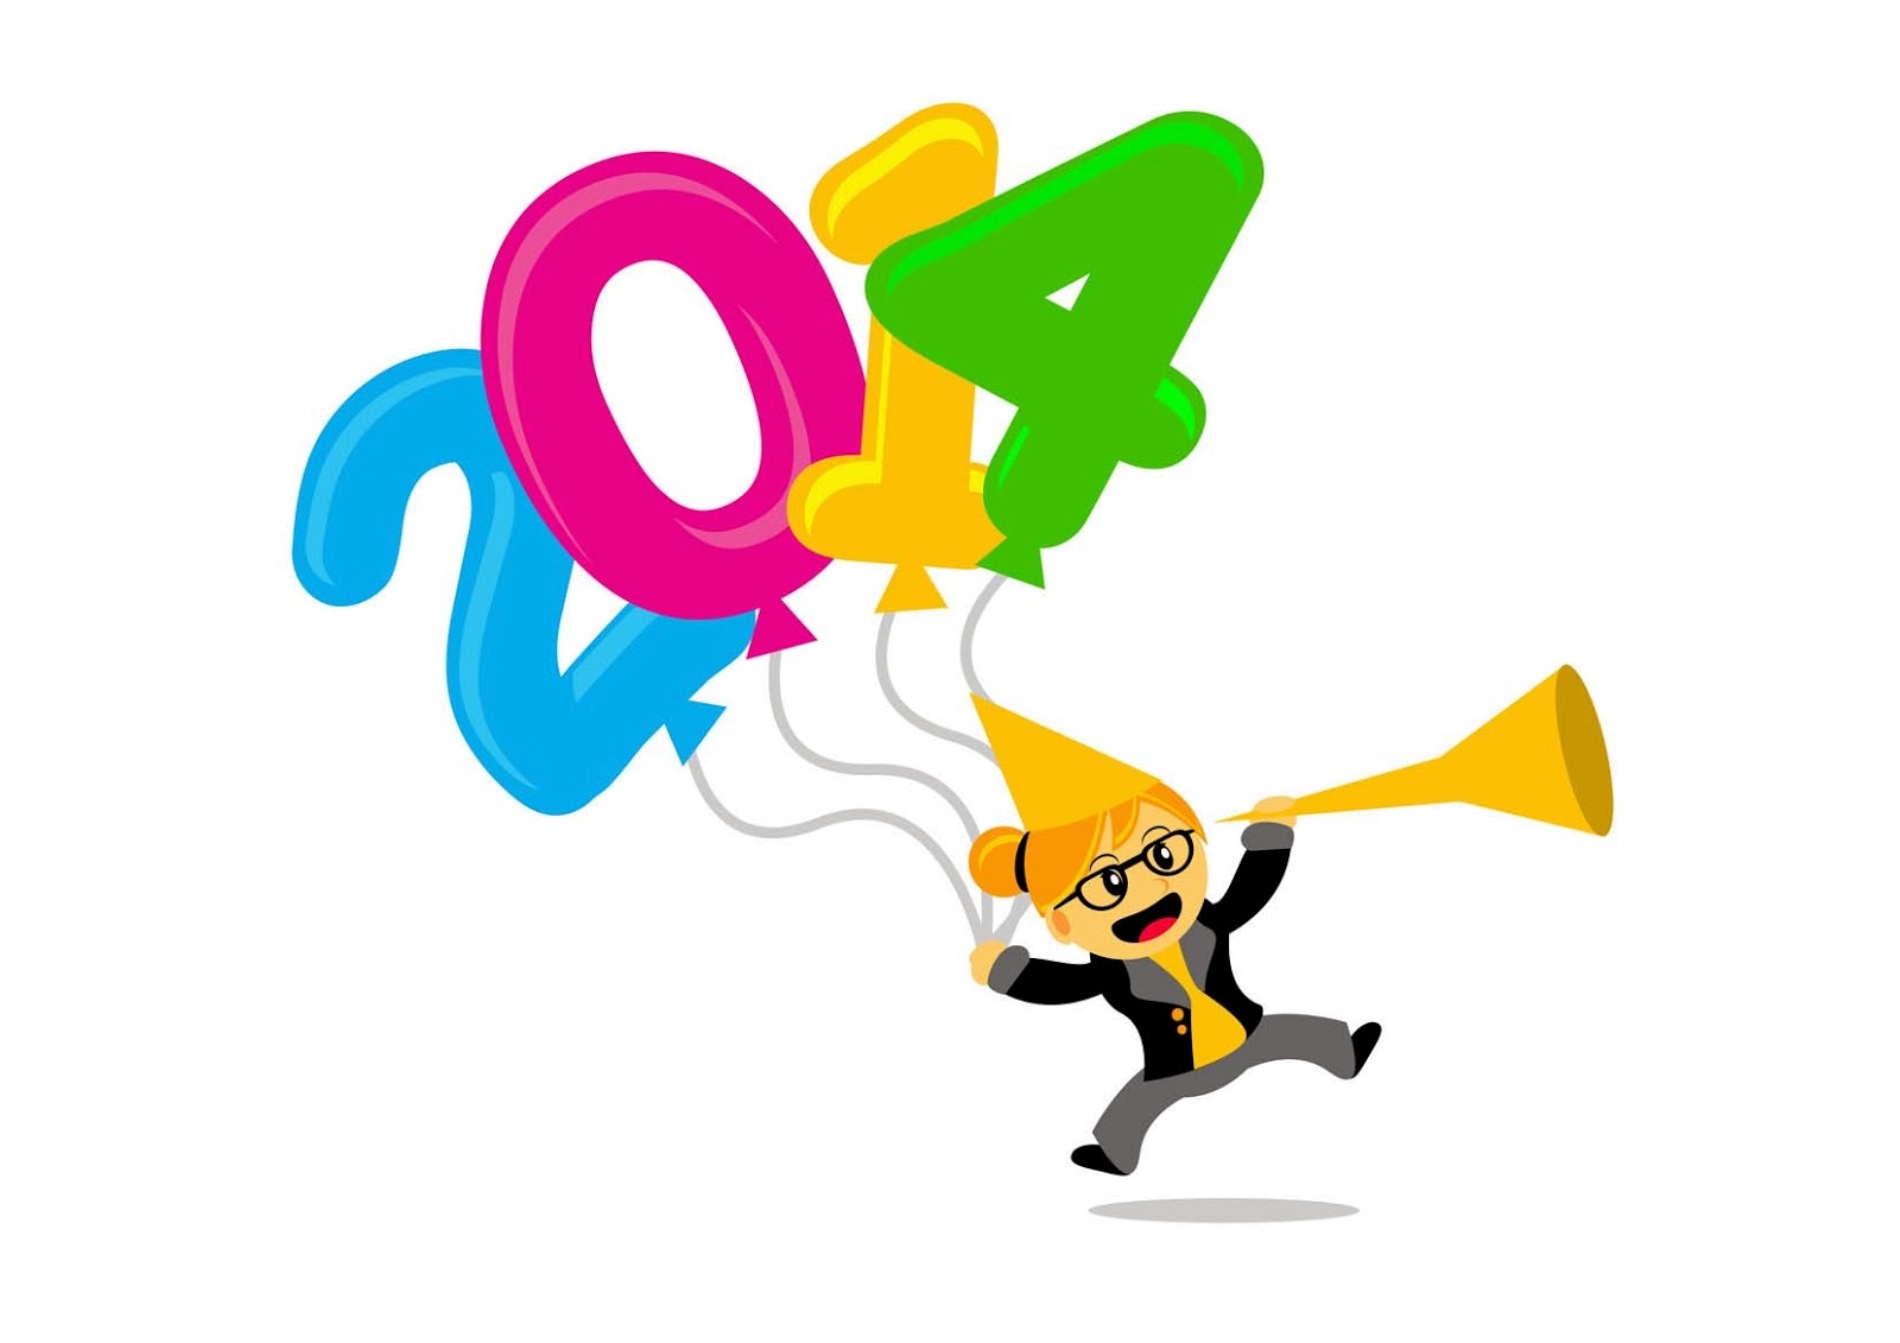 Happy New Year 2014 Clip Art Designs of 2014 Happy New Year